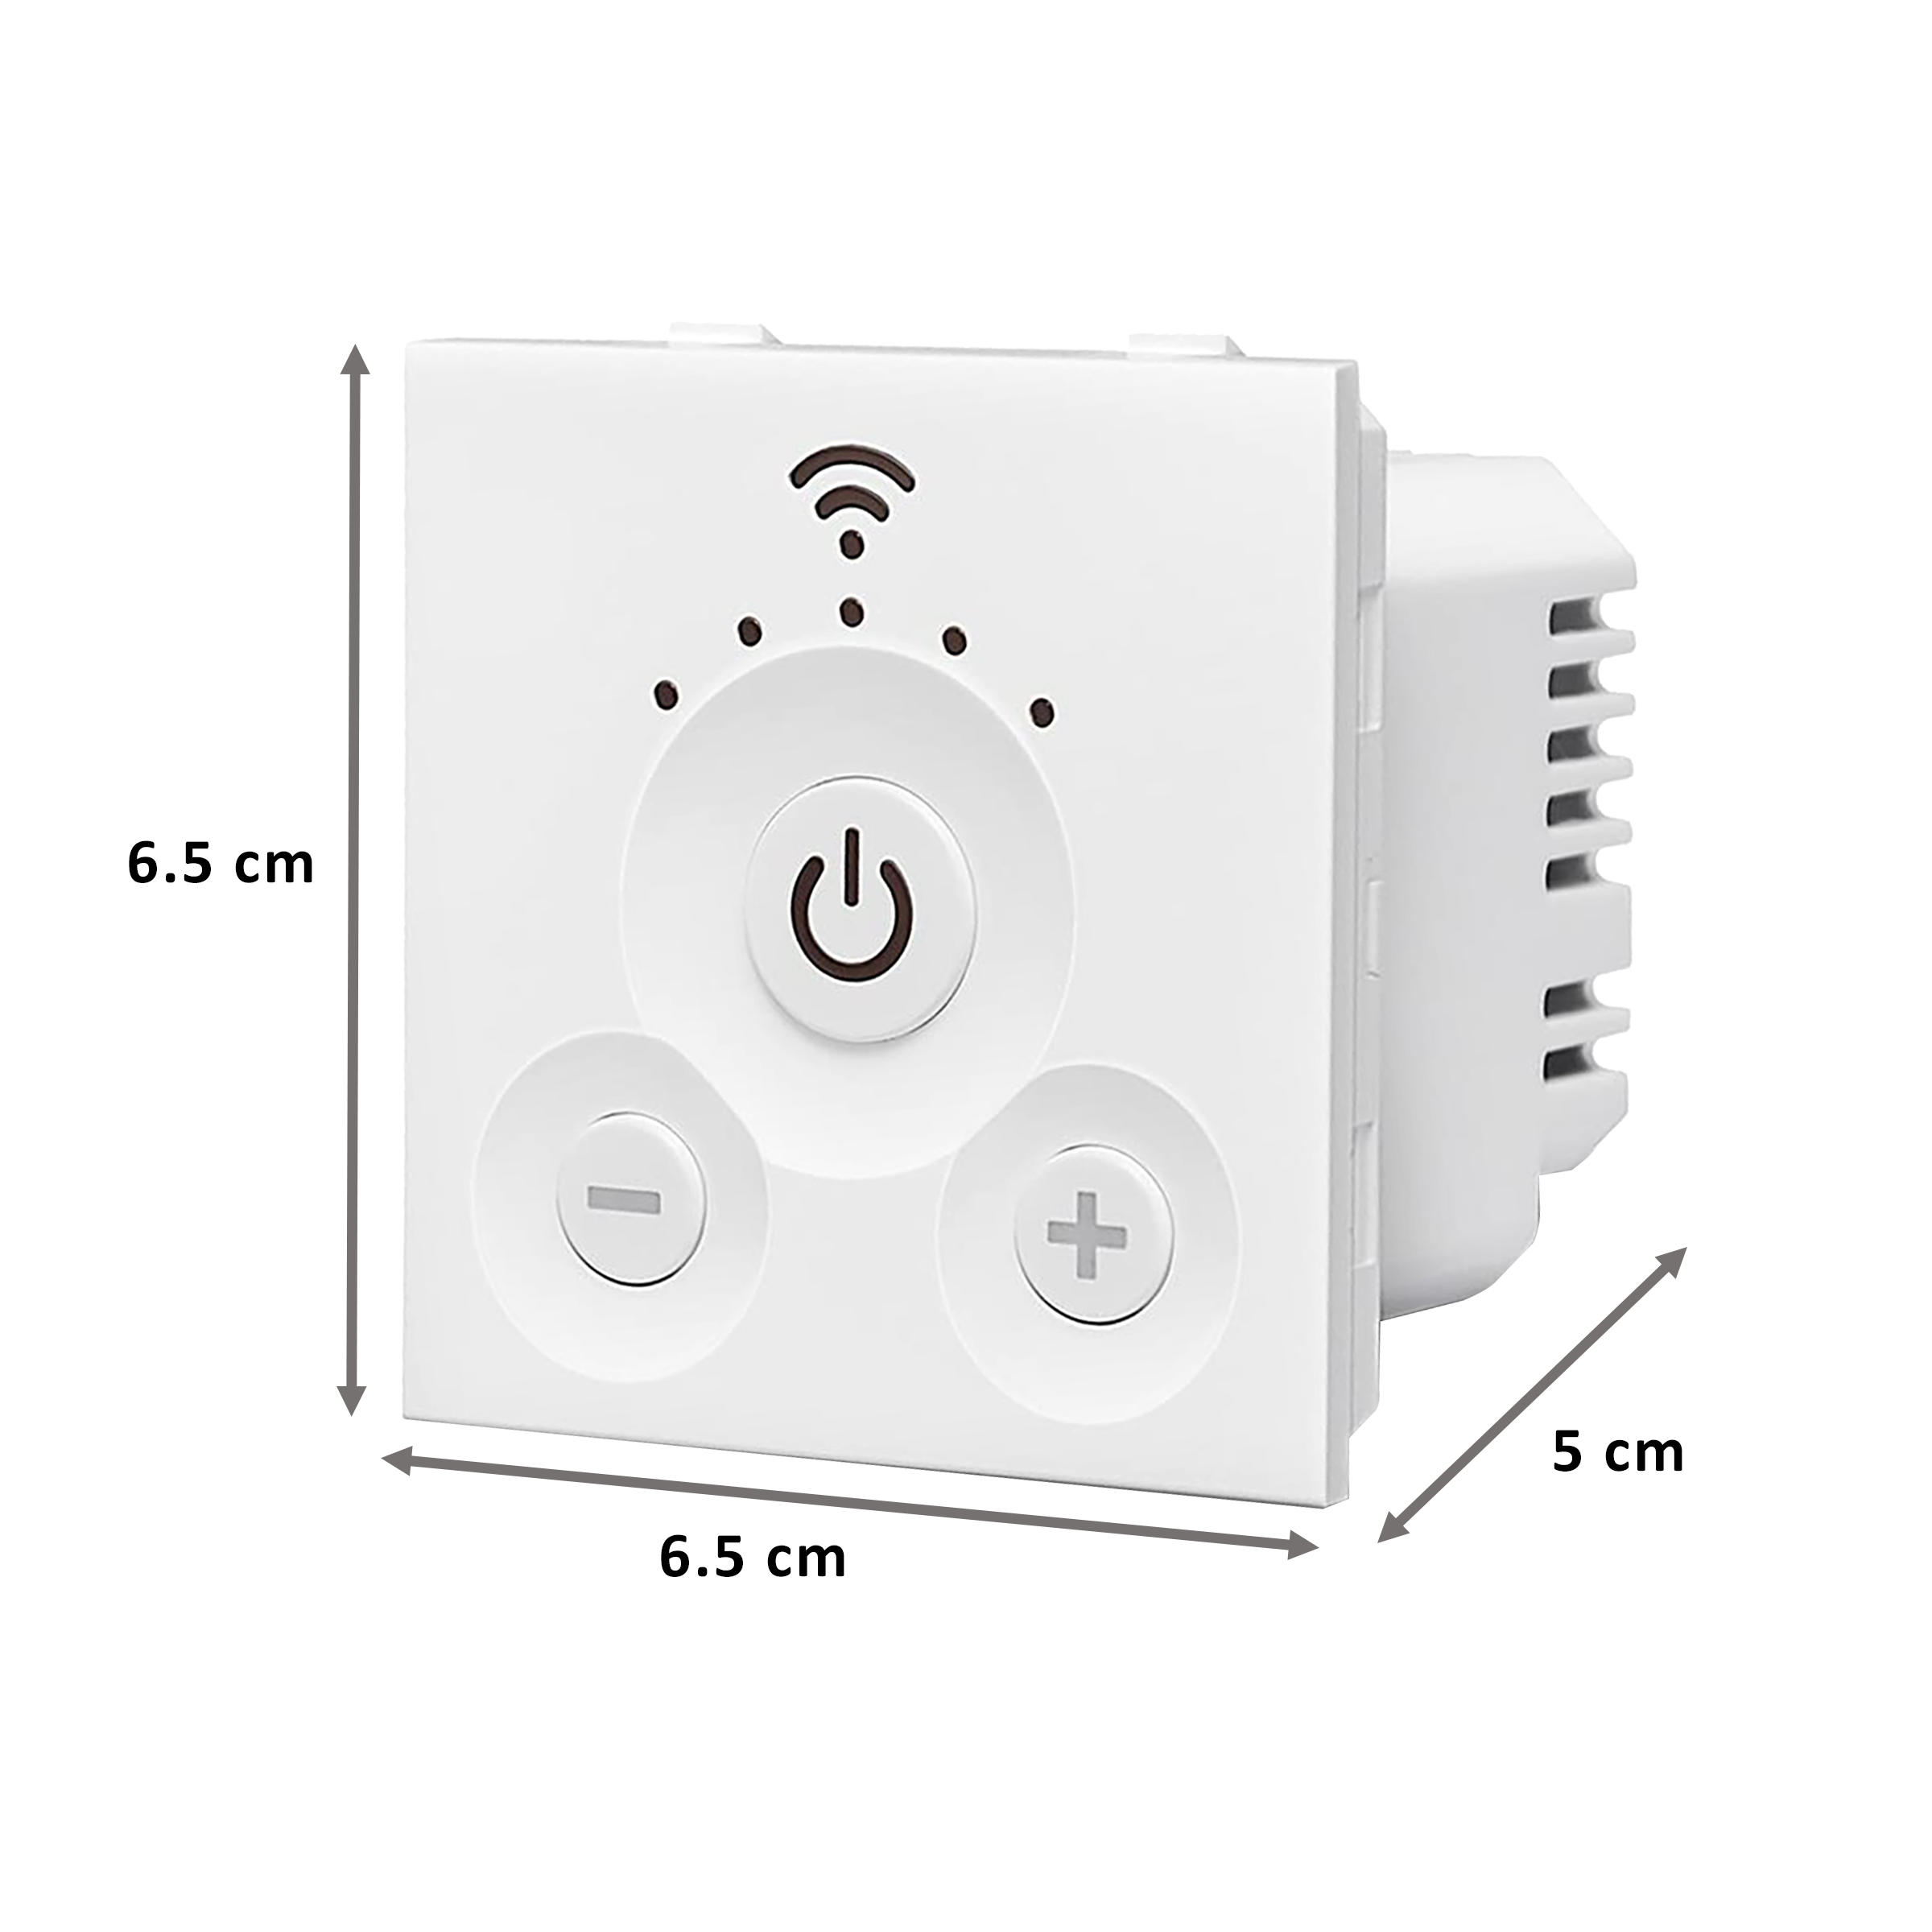 Tata Power EZ Home Smart Switch and Regulator (Google and Alexa Voice Assisted, FI-01-150 GWF-KM26, White)_2